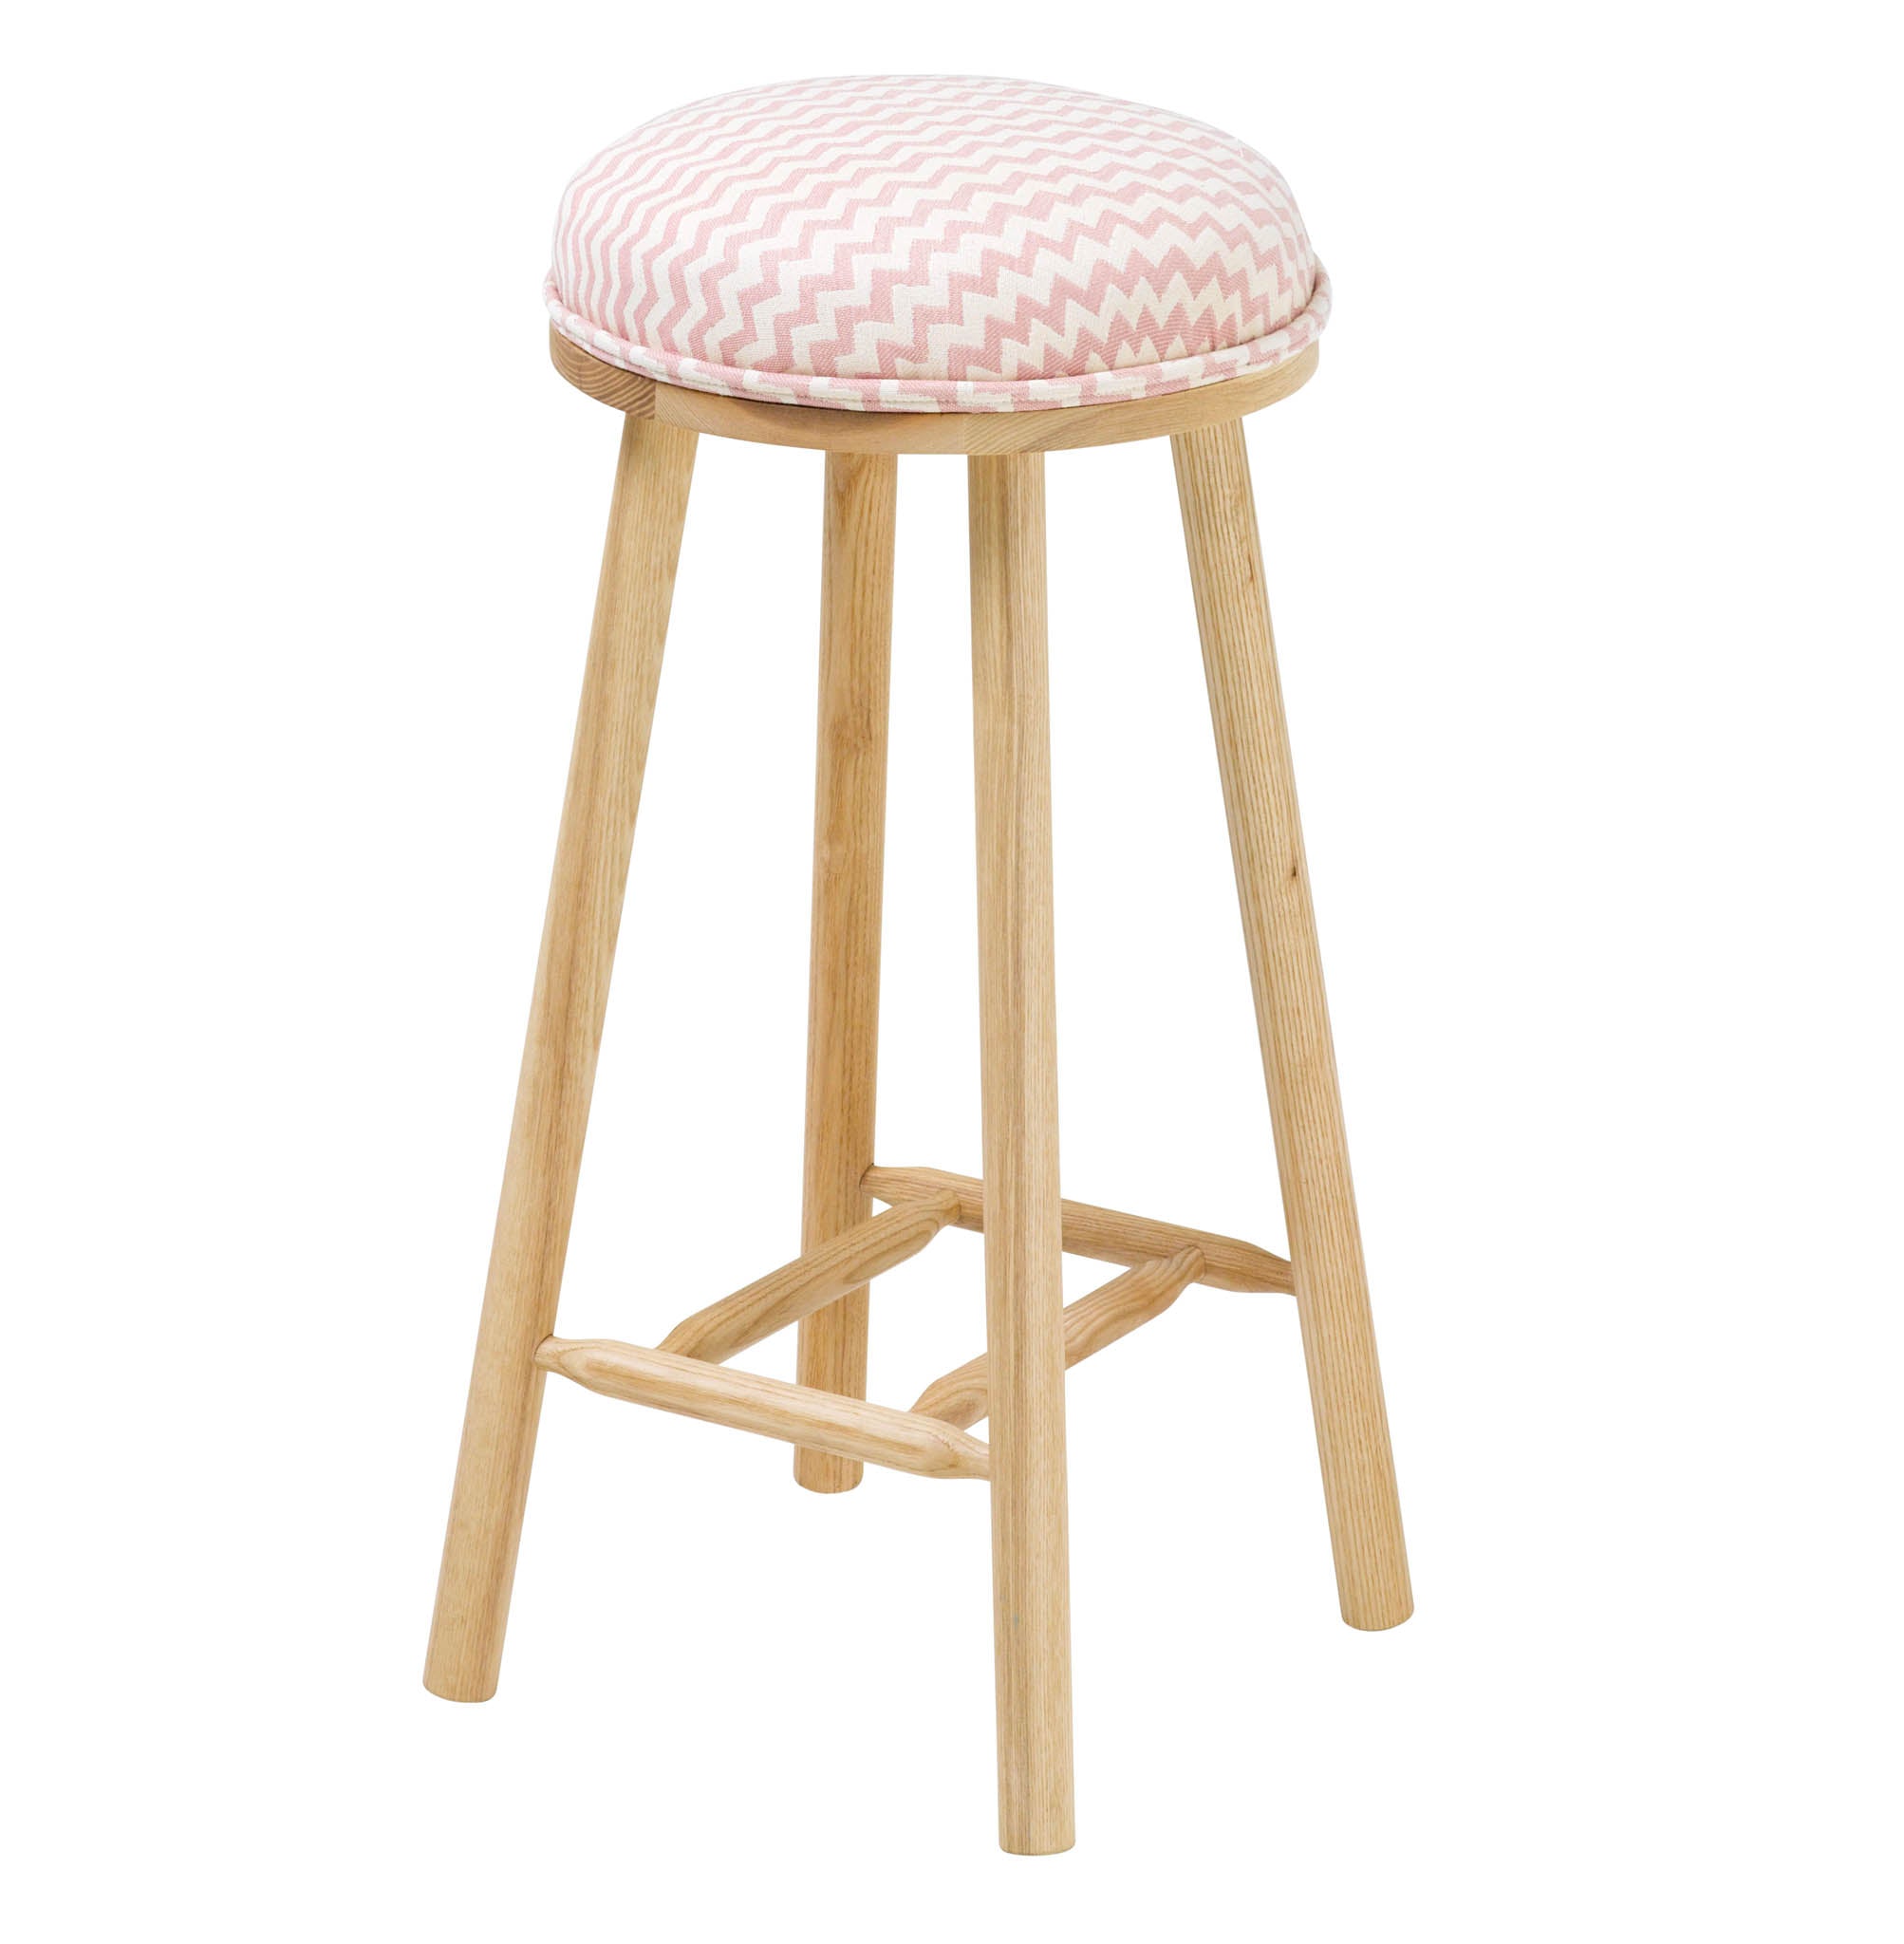 Turner Counter Stool Upholstered in Climbing Chevy from Tori Murphy